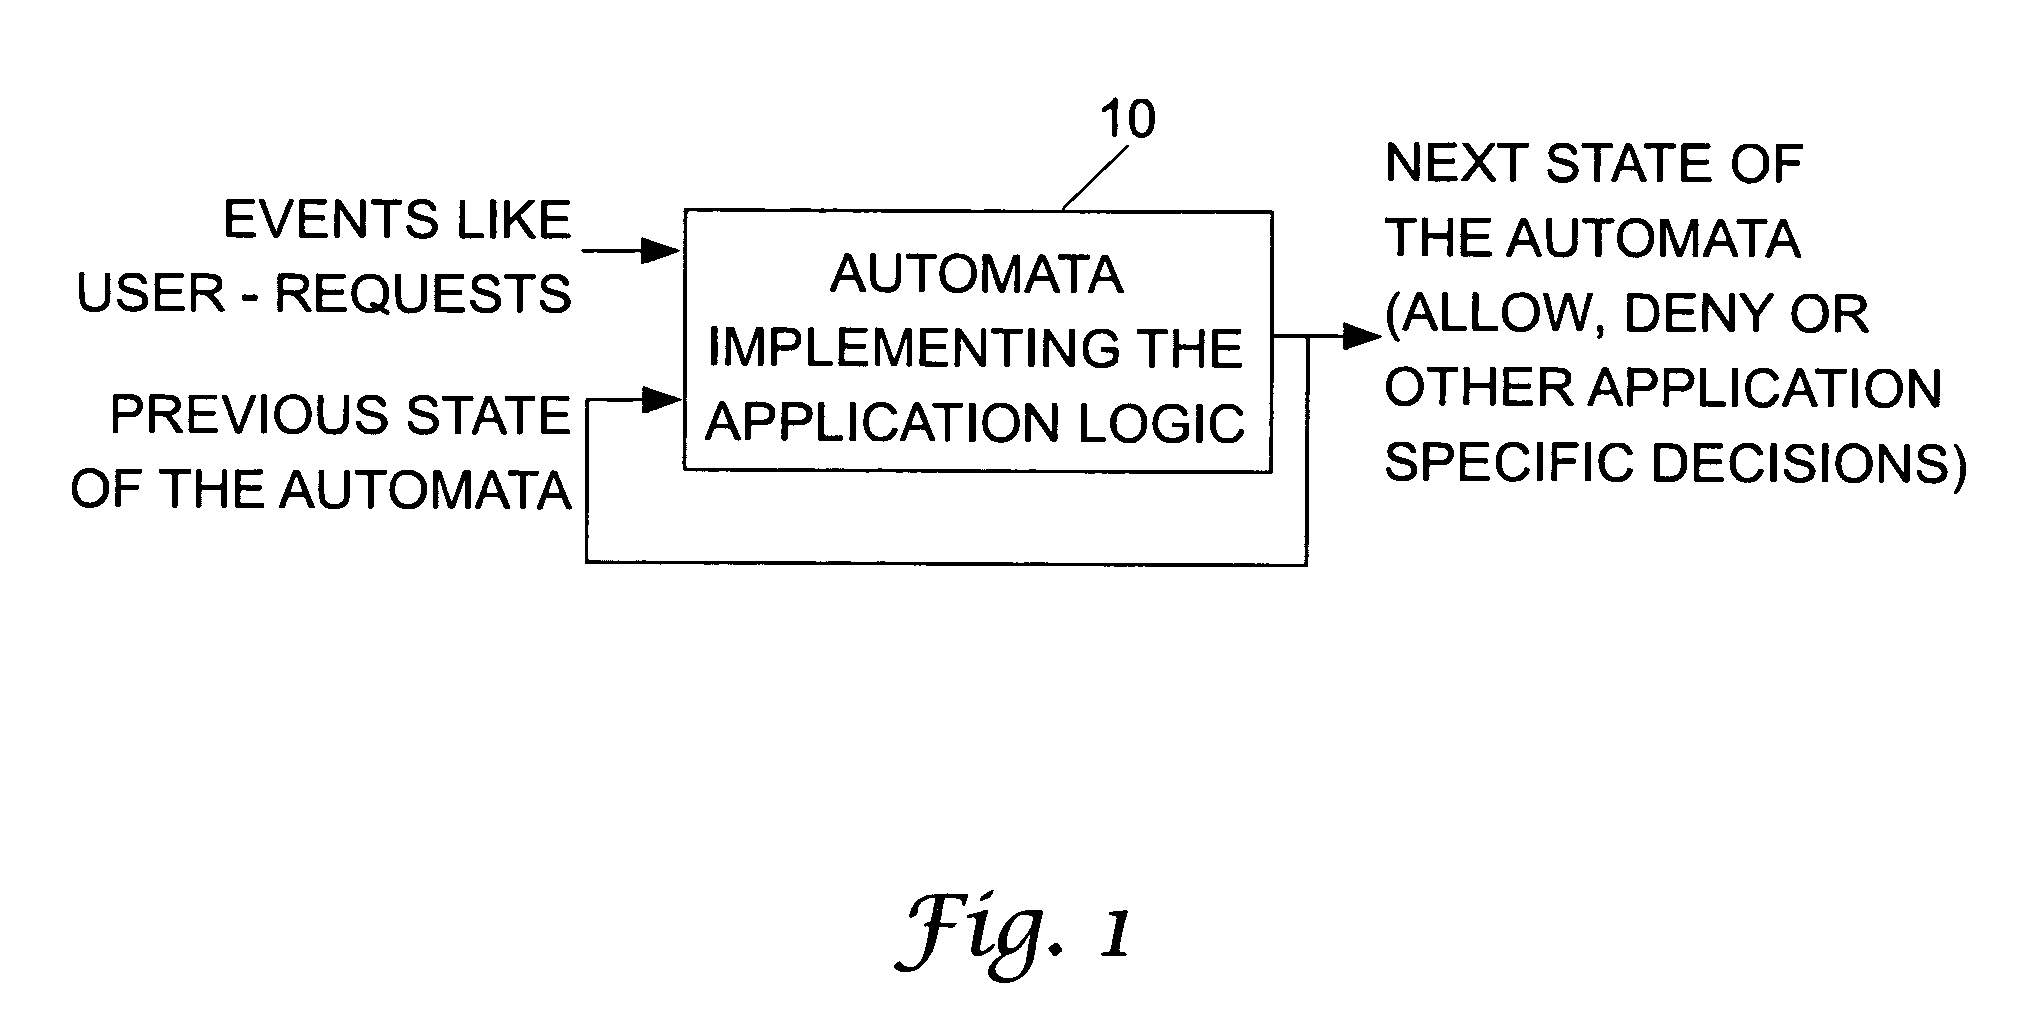 Automata based storage and execution of application logic in smart card like devices